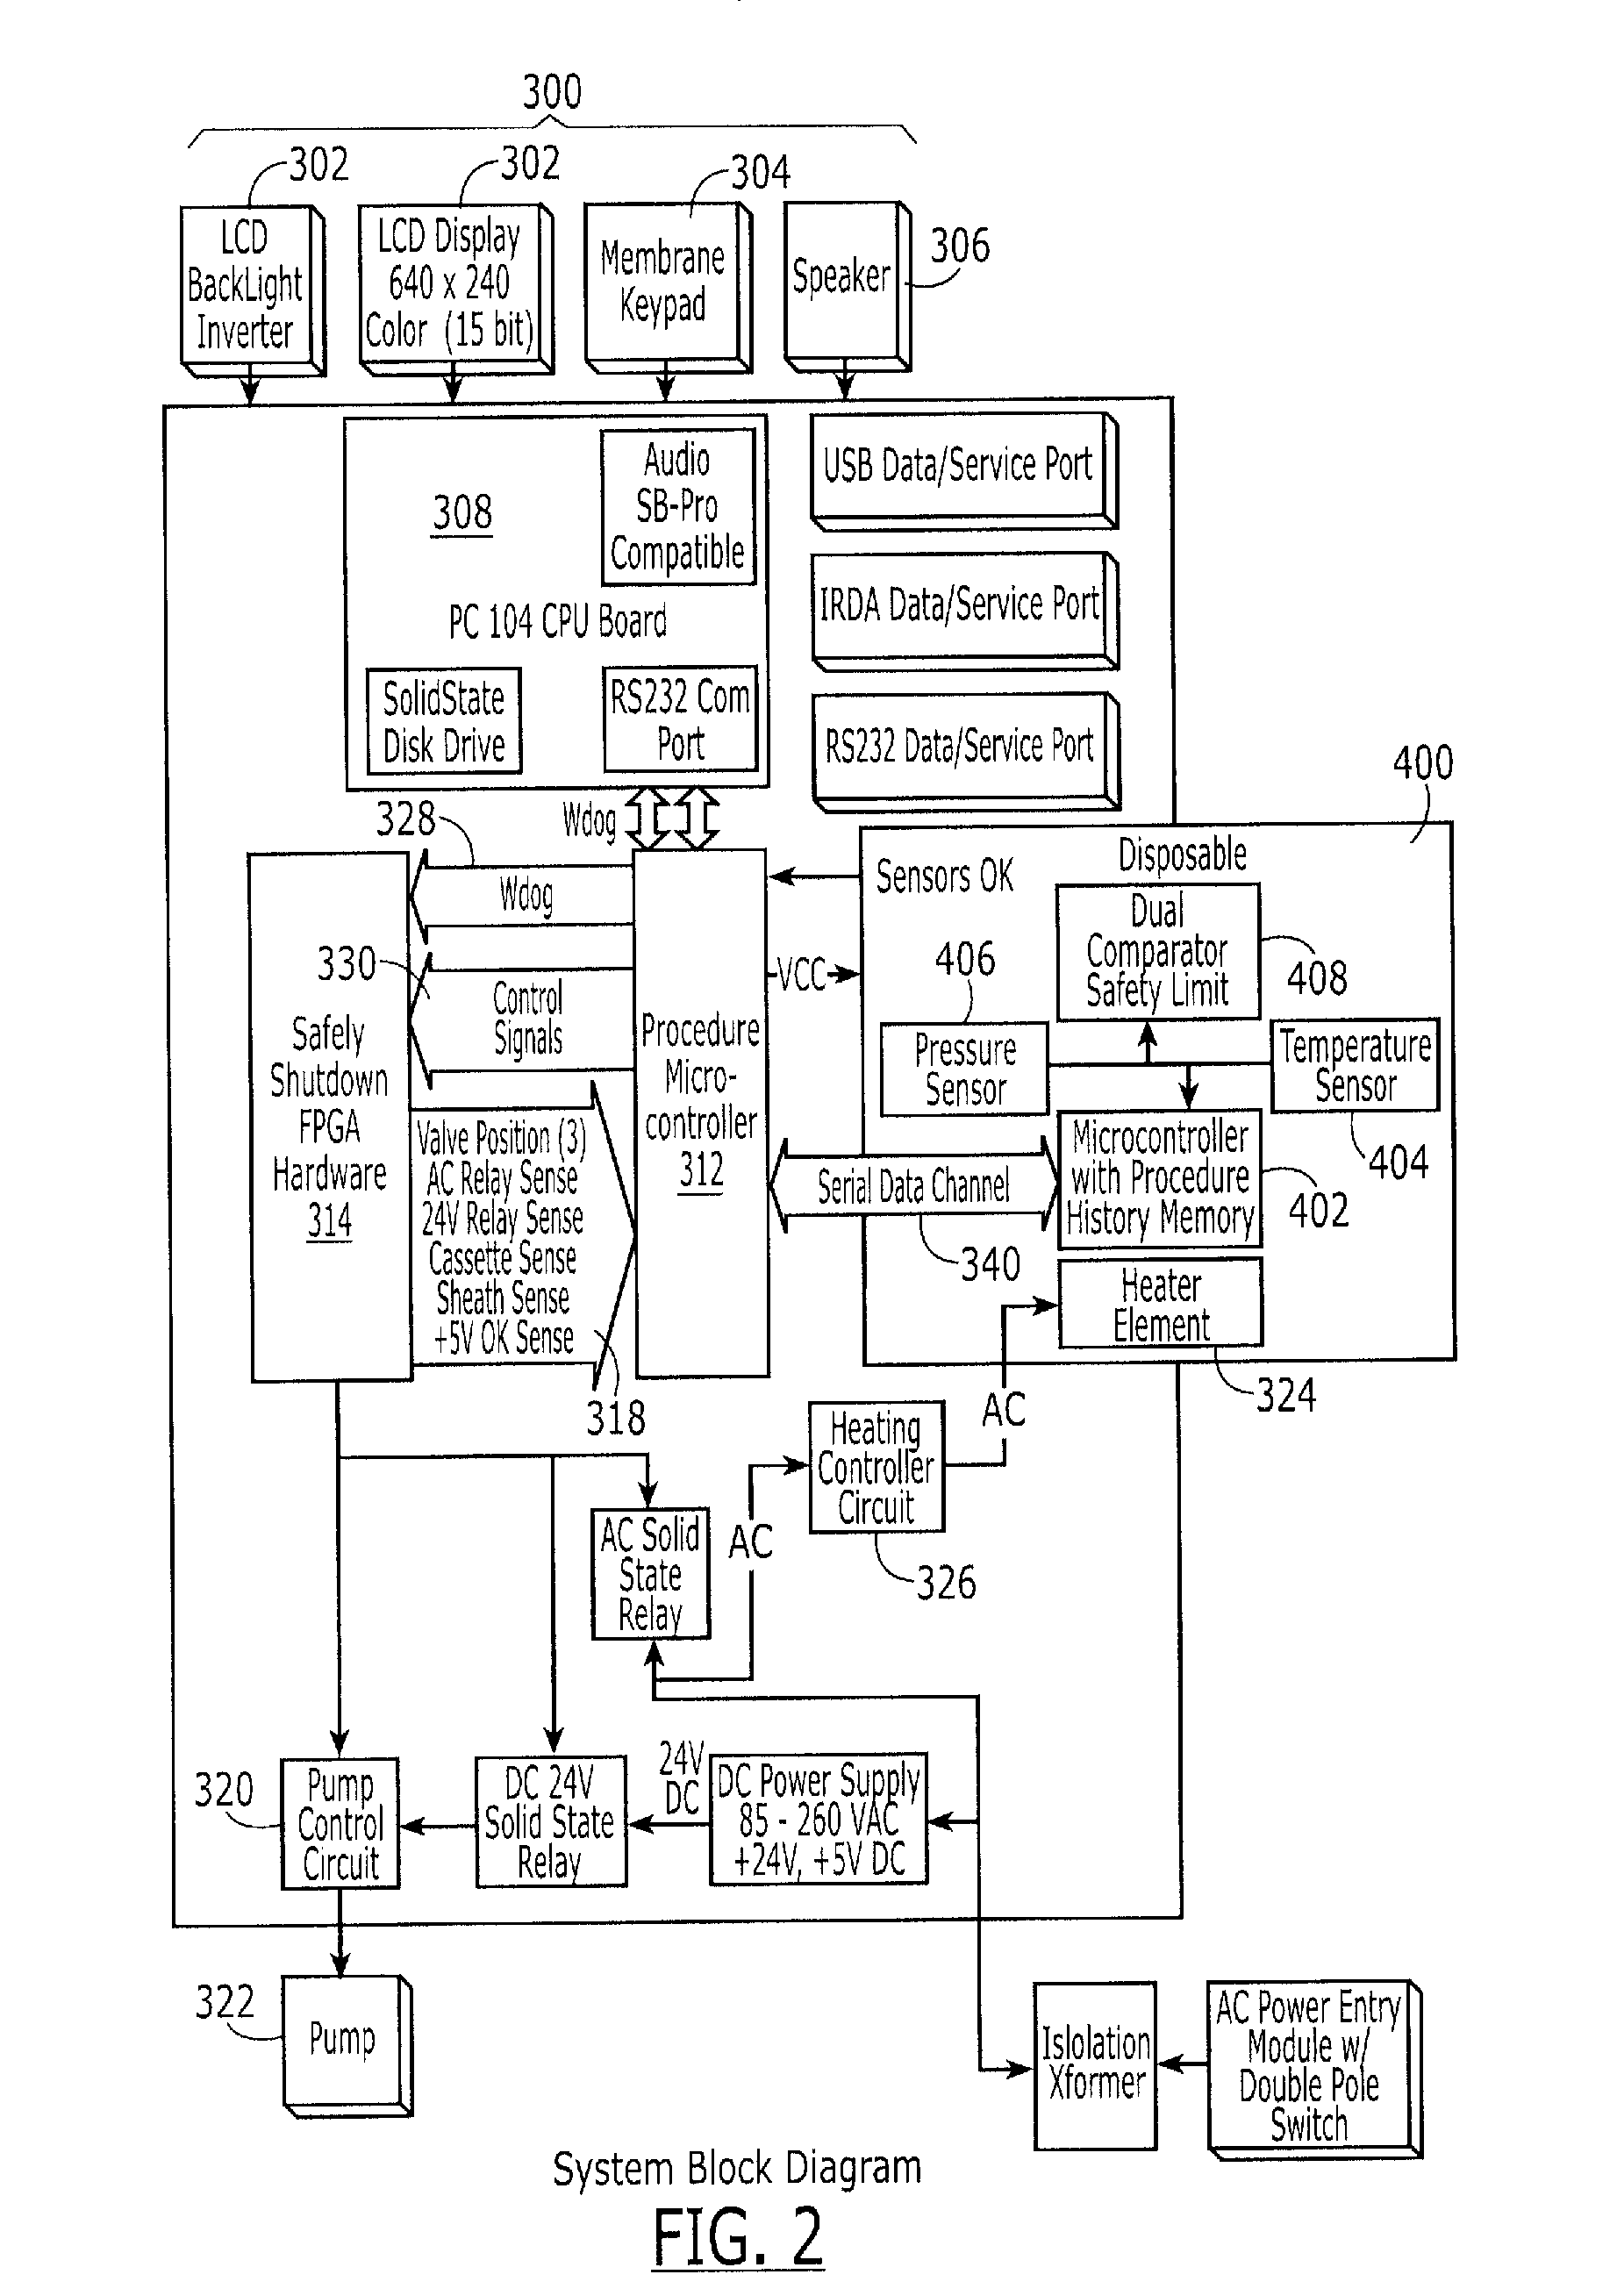 Device for circulating heated fluid